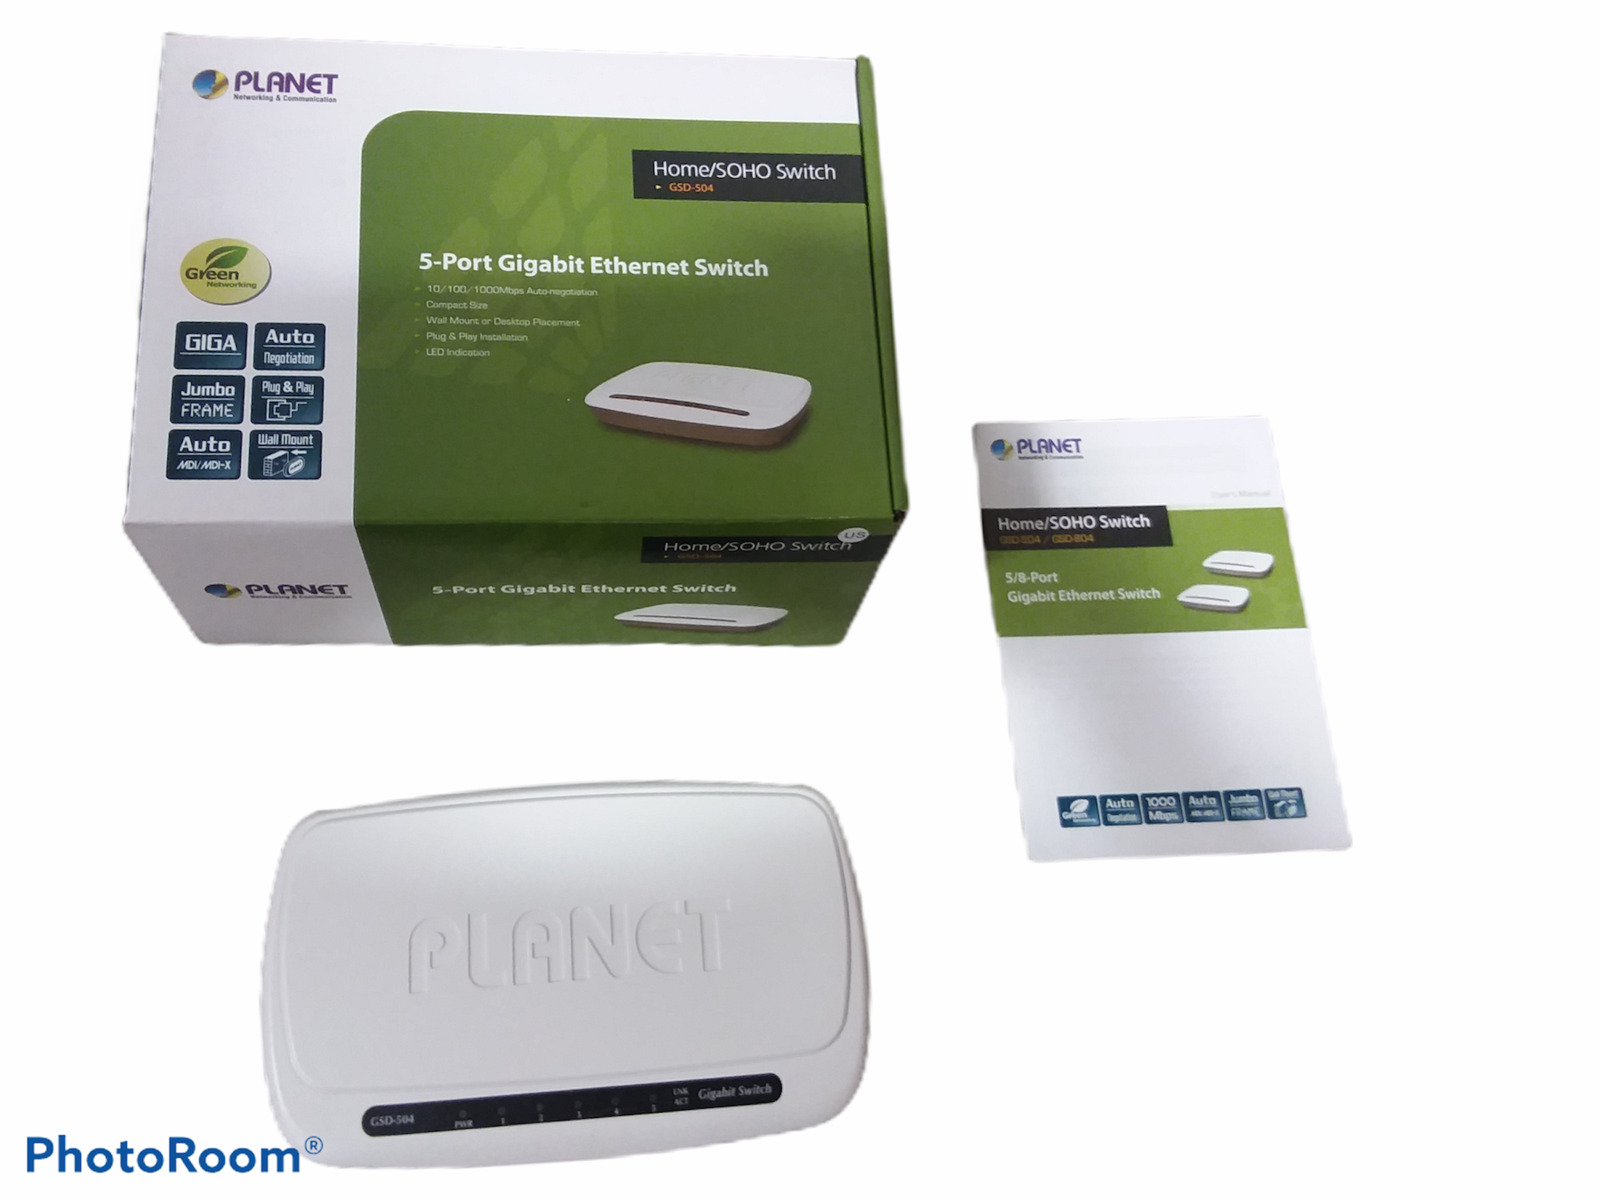 Planet Networking GSD-504 ver 7 5-Port Gigabit Ethernet Switch Home/SOHO Switch